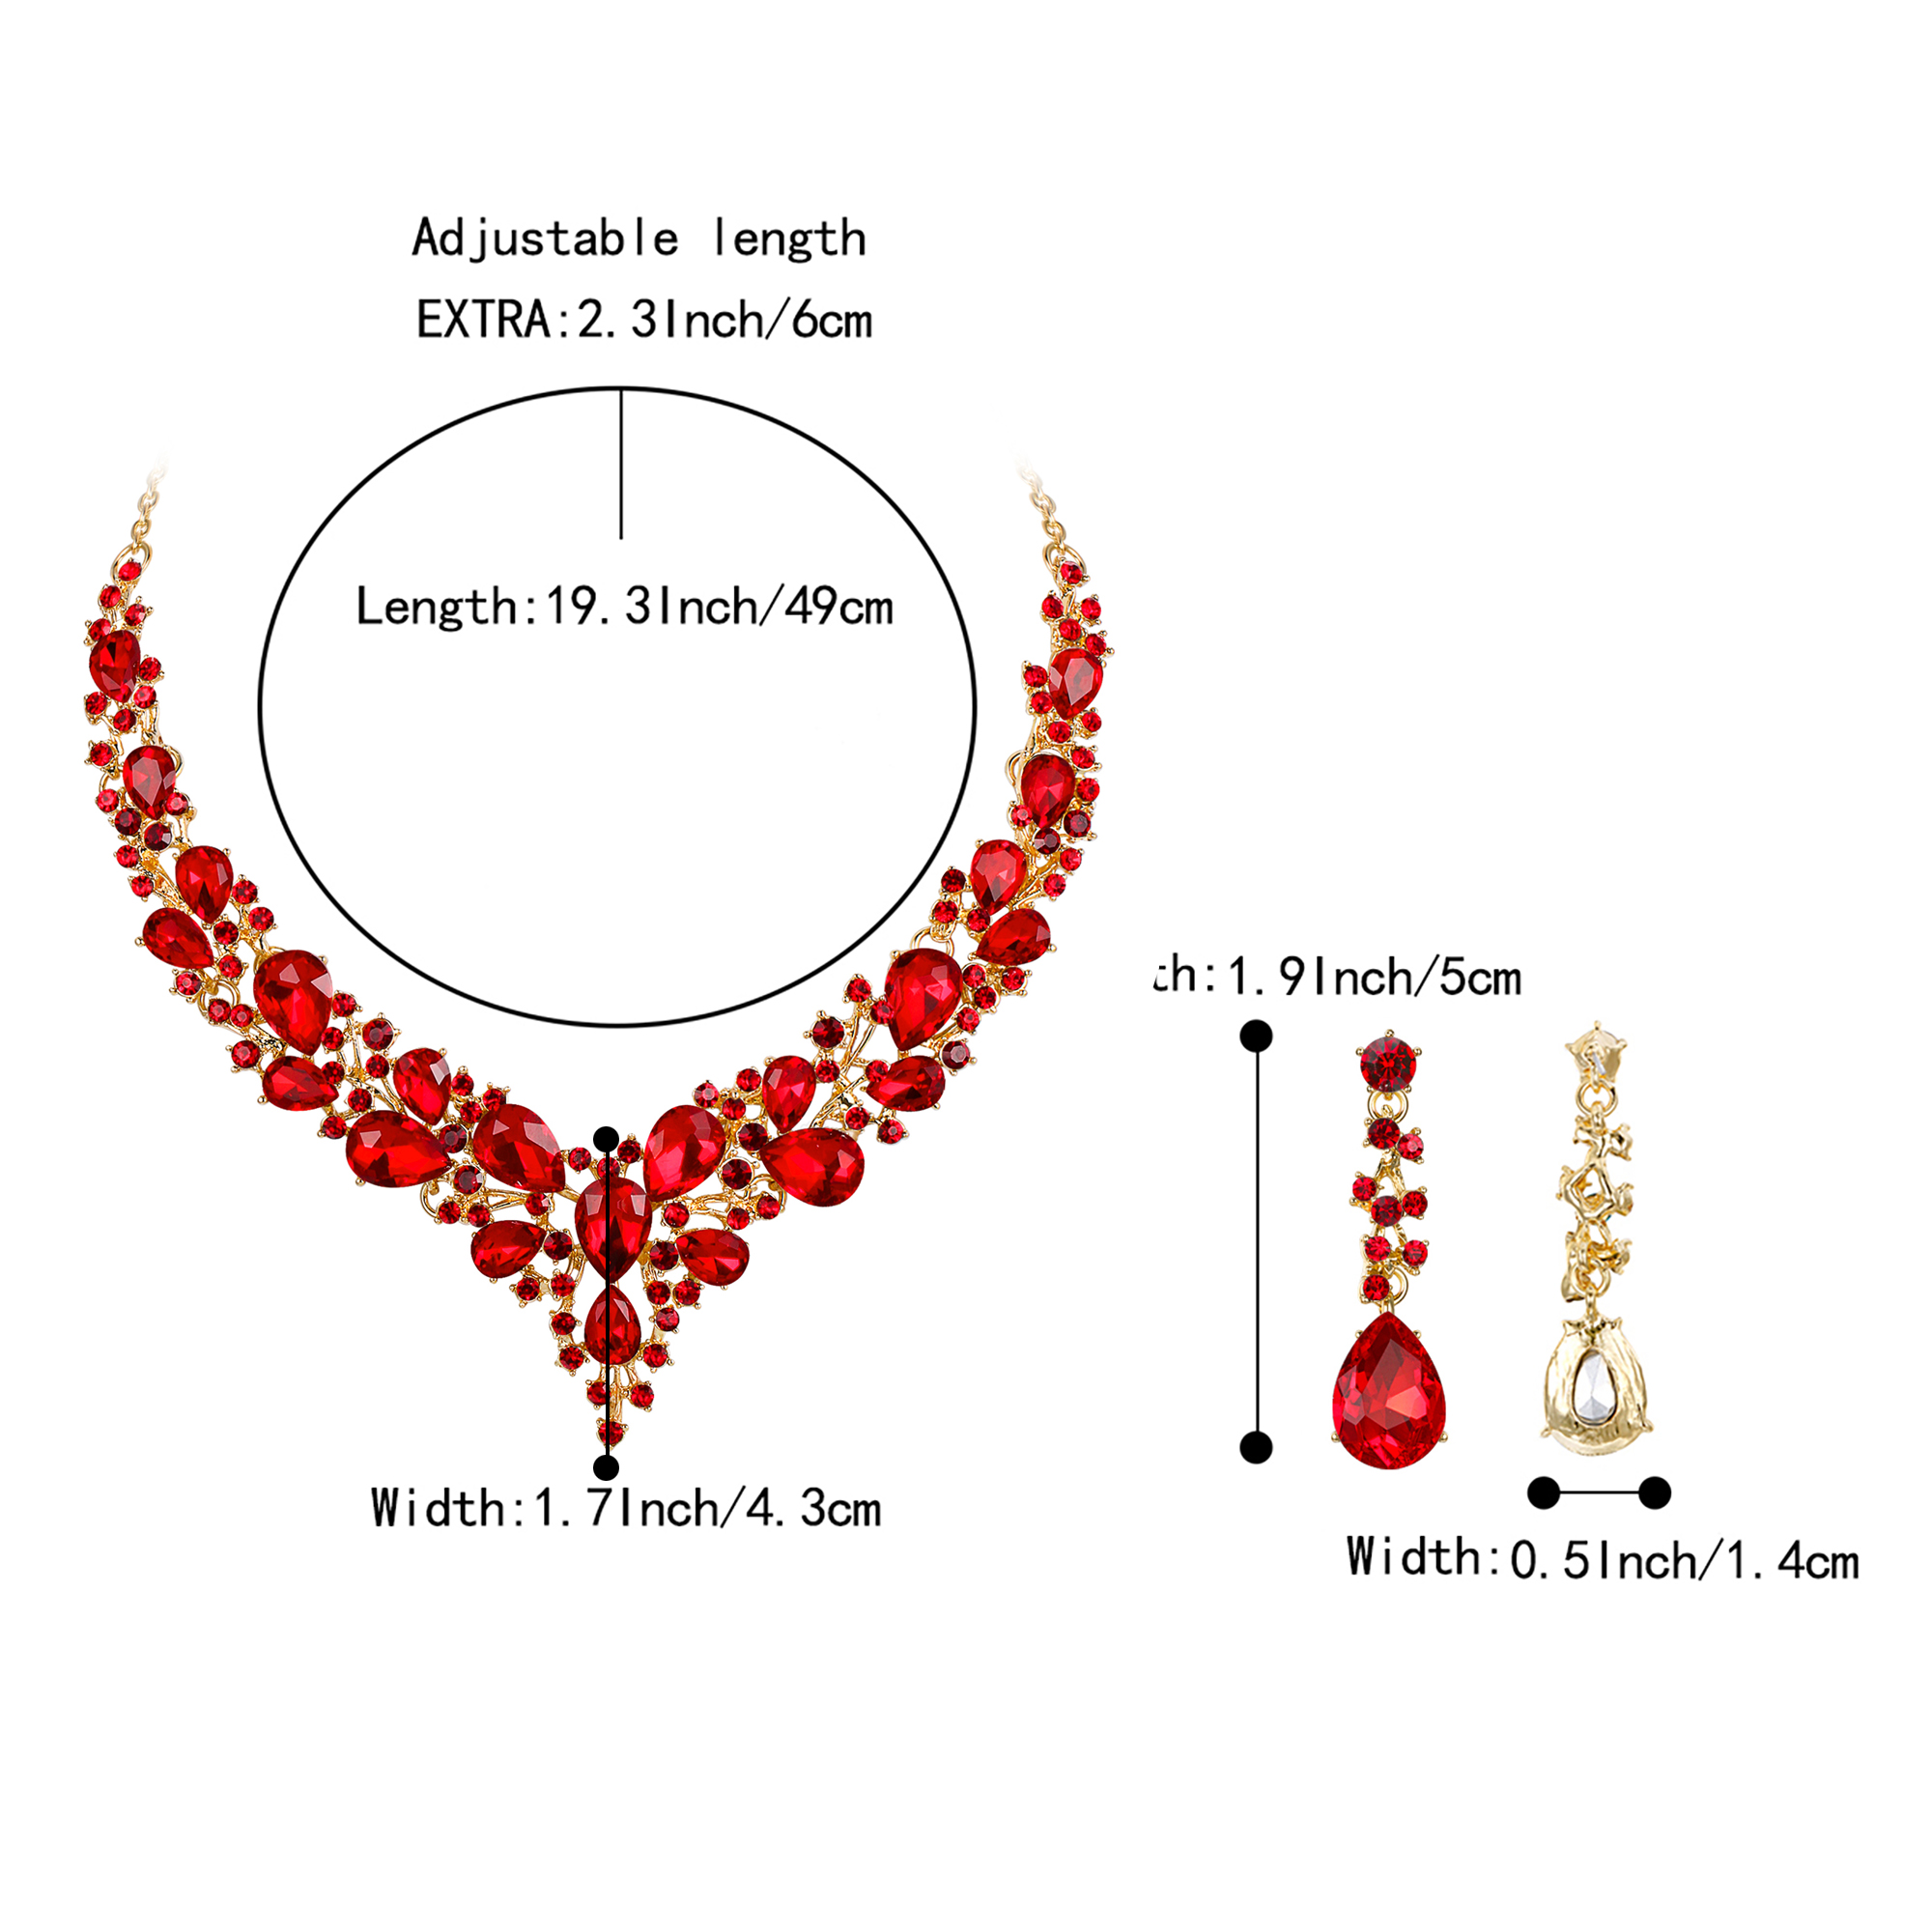 Wedure Wedding Bridal Necklace Earrings Jewelry Set for Women, Austrian Crystal Teardrop Cluster Statement Necklace Dangle Earrings Set Ruby Color Gold-Tone - image 4 of 5